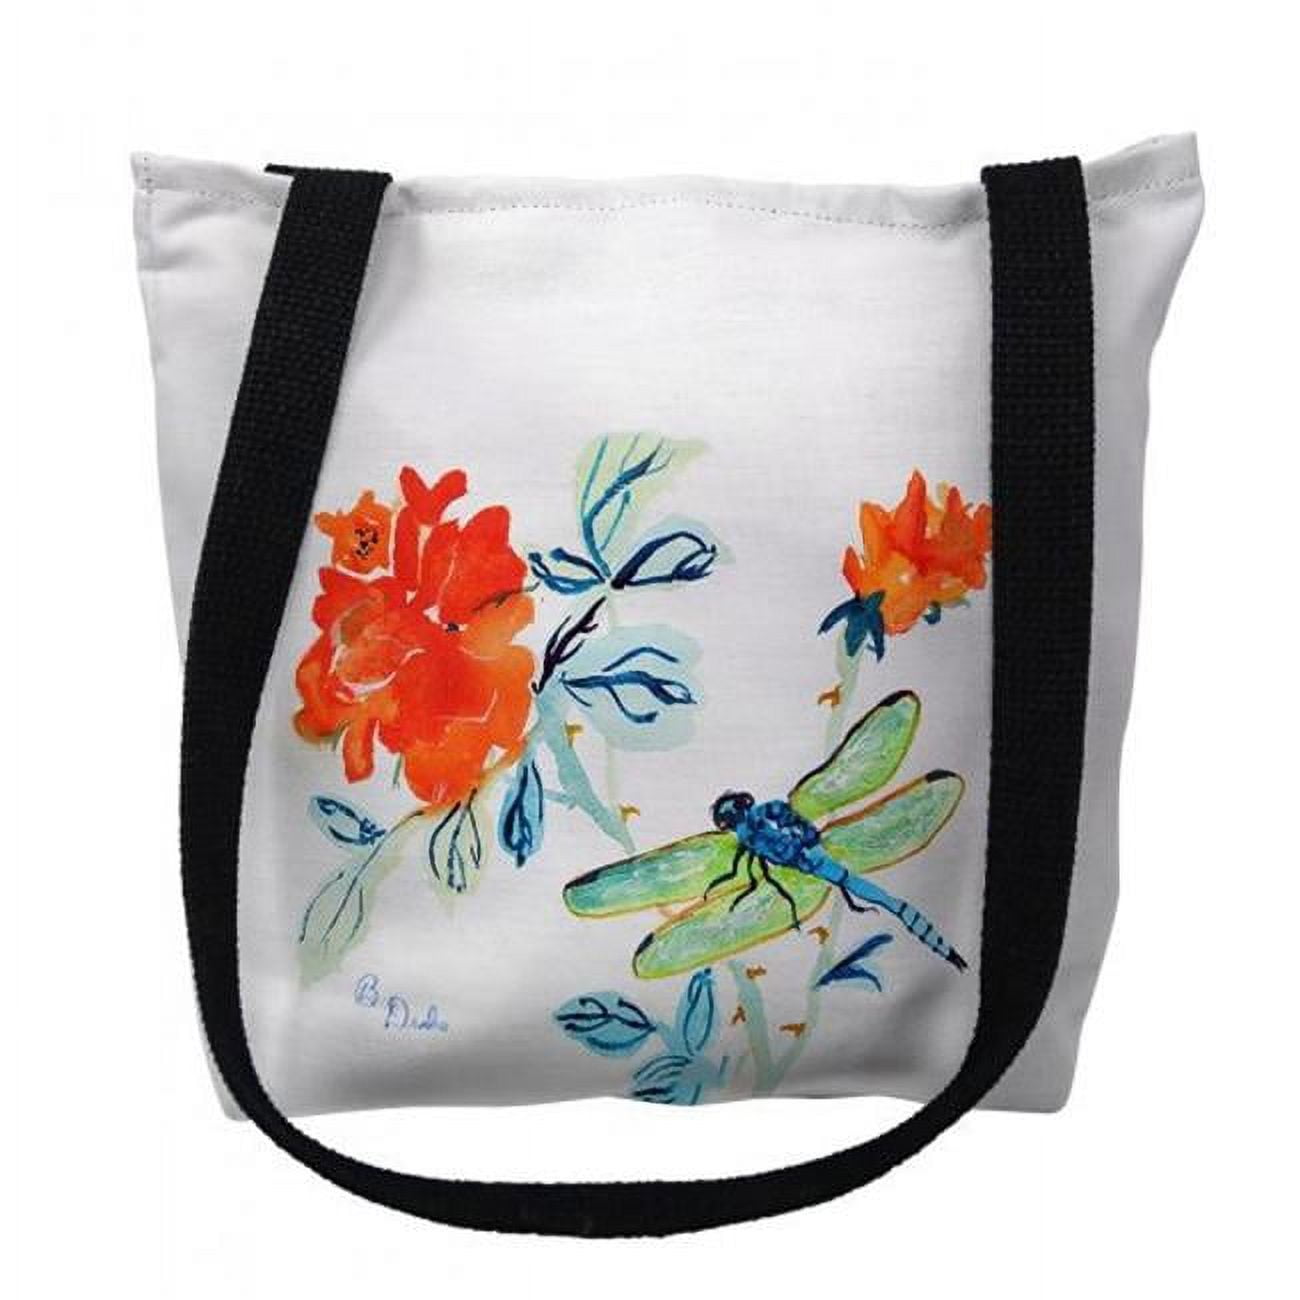 Ty1046m 16 X 16 In. Dragonfly & Red Flower Tote Bag - Medium